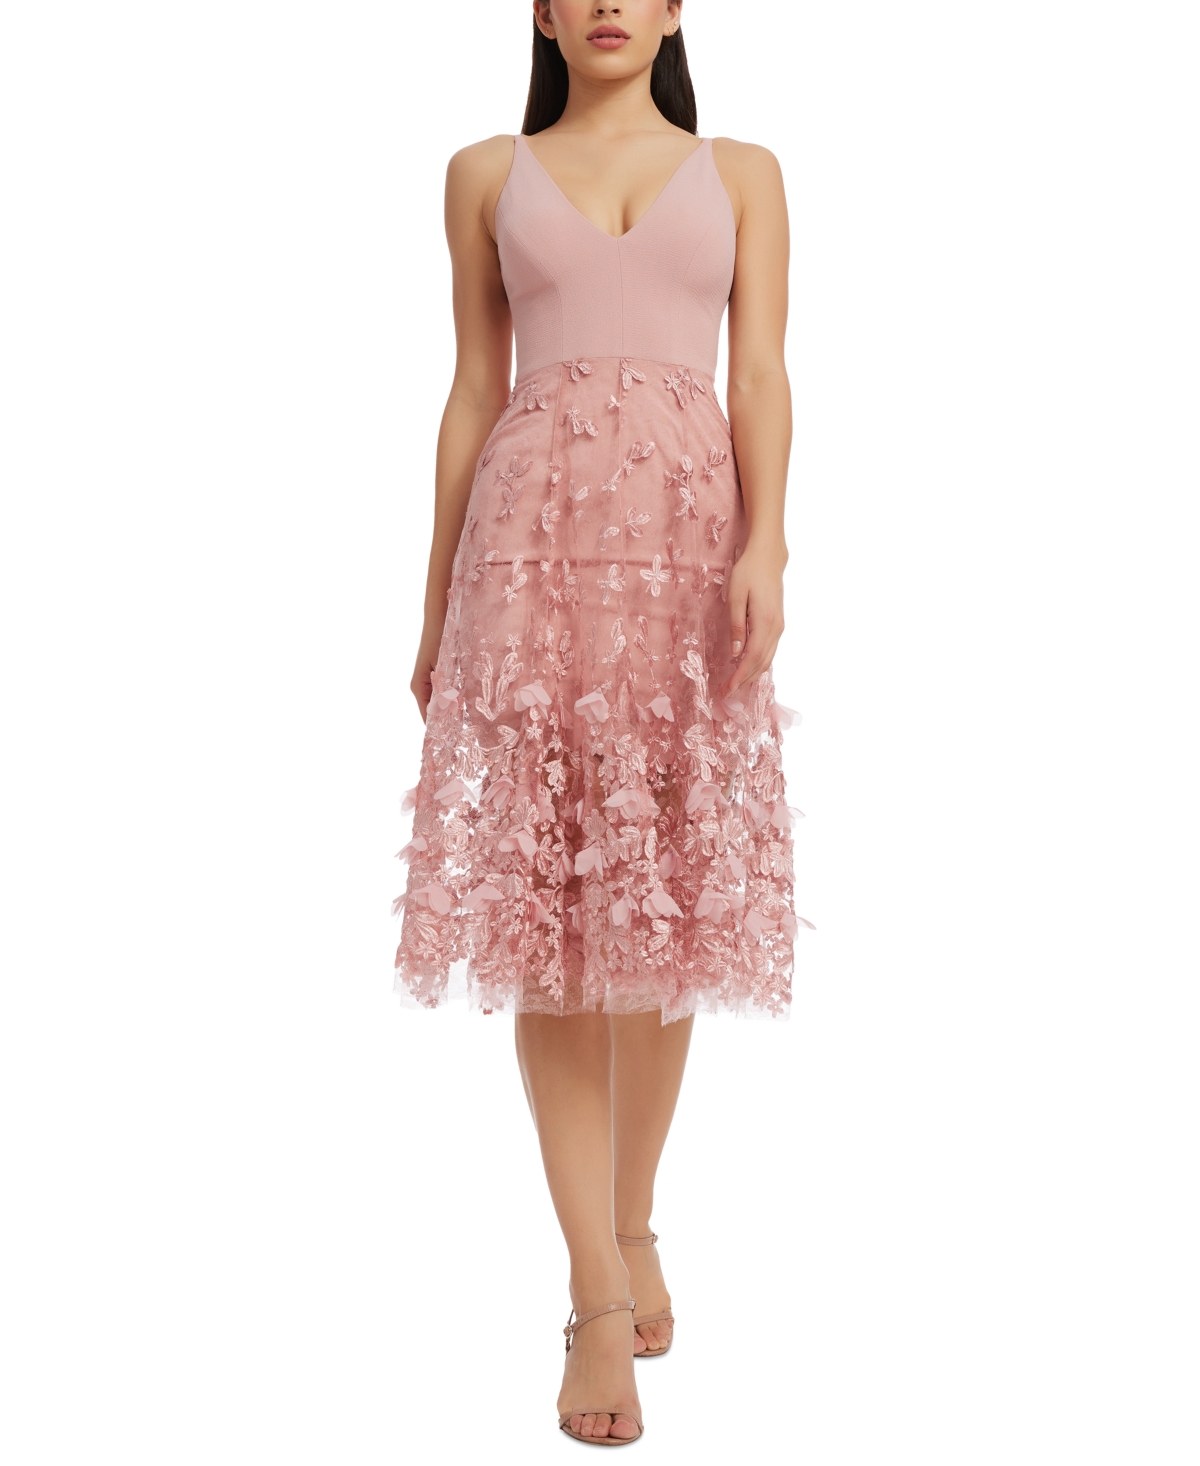 Dress The Population Plunging Darleen Neck Fit & Flare Dress In Blush